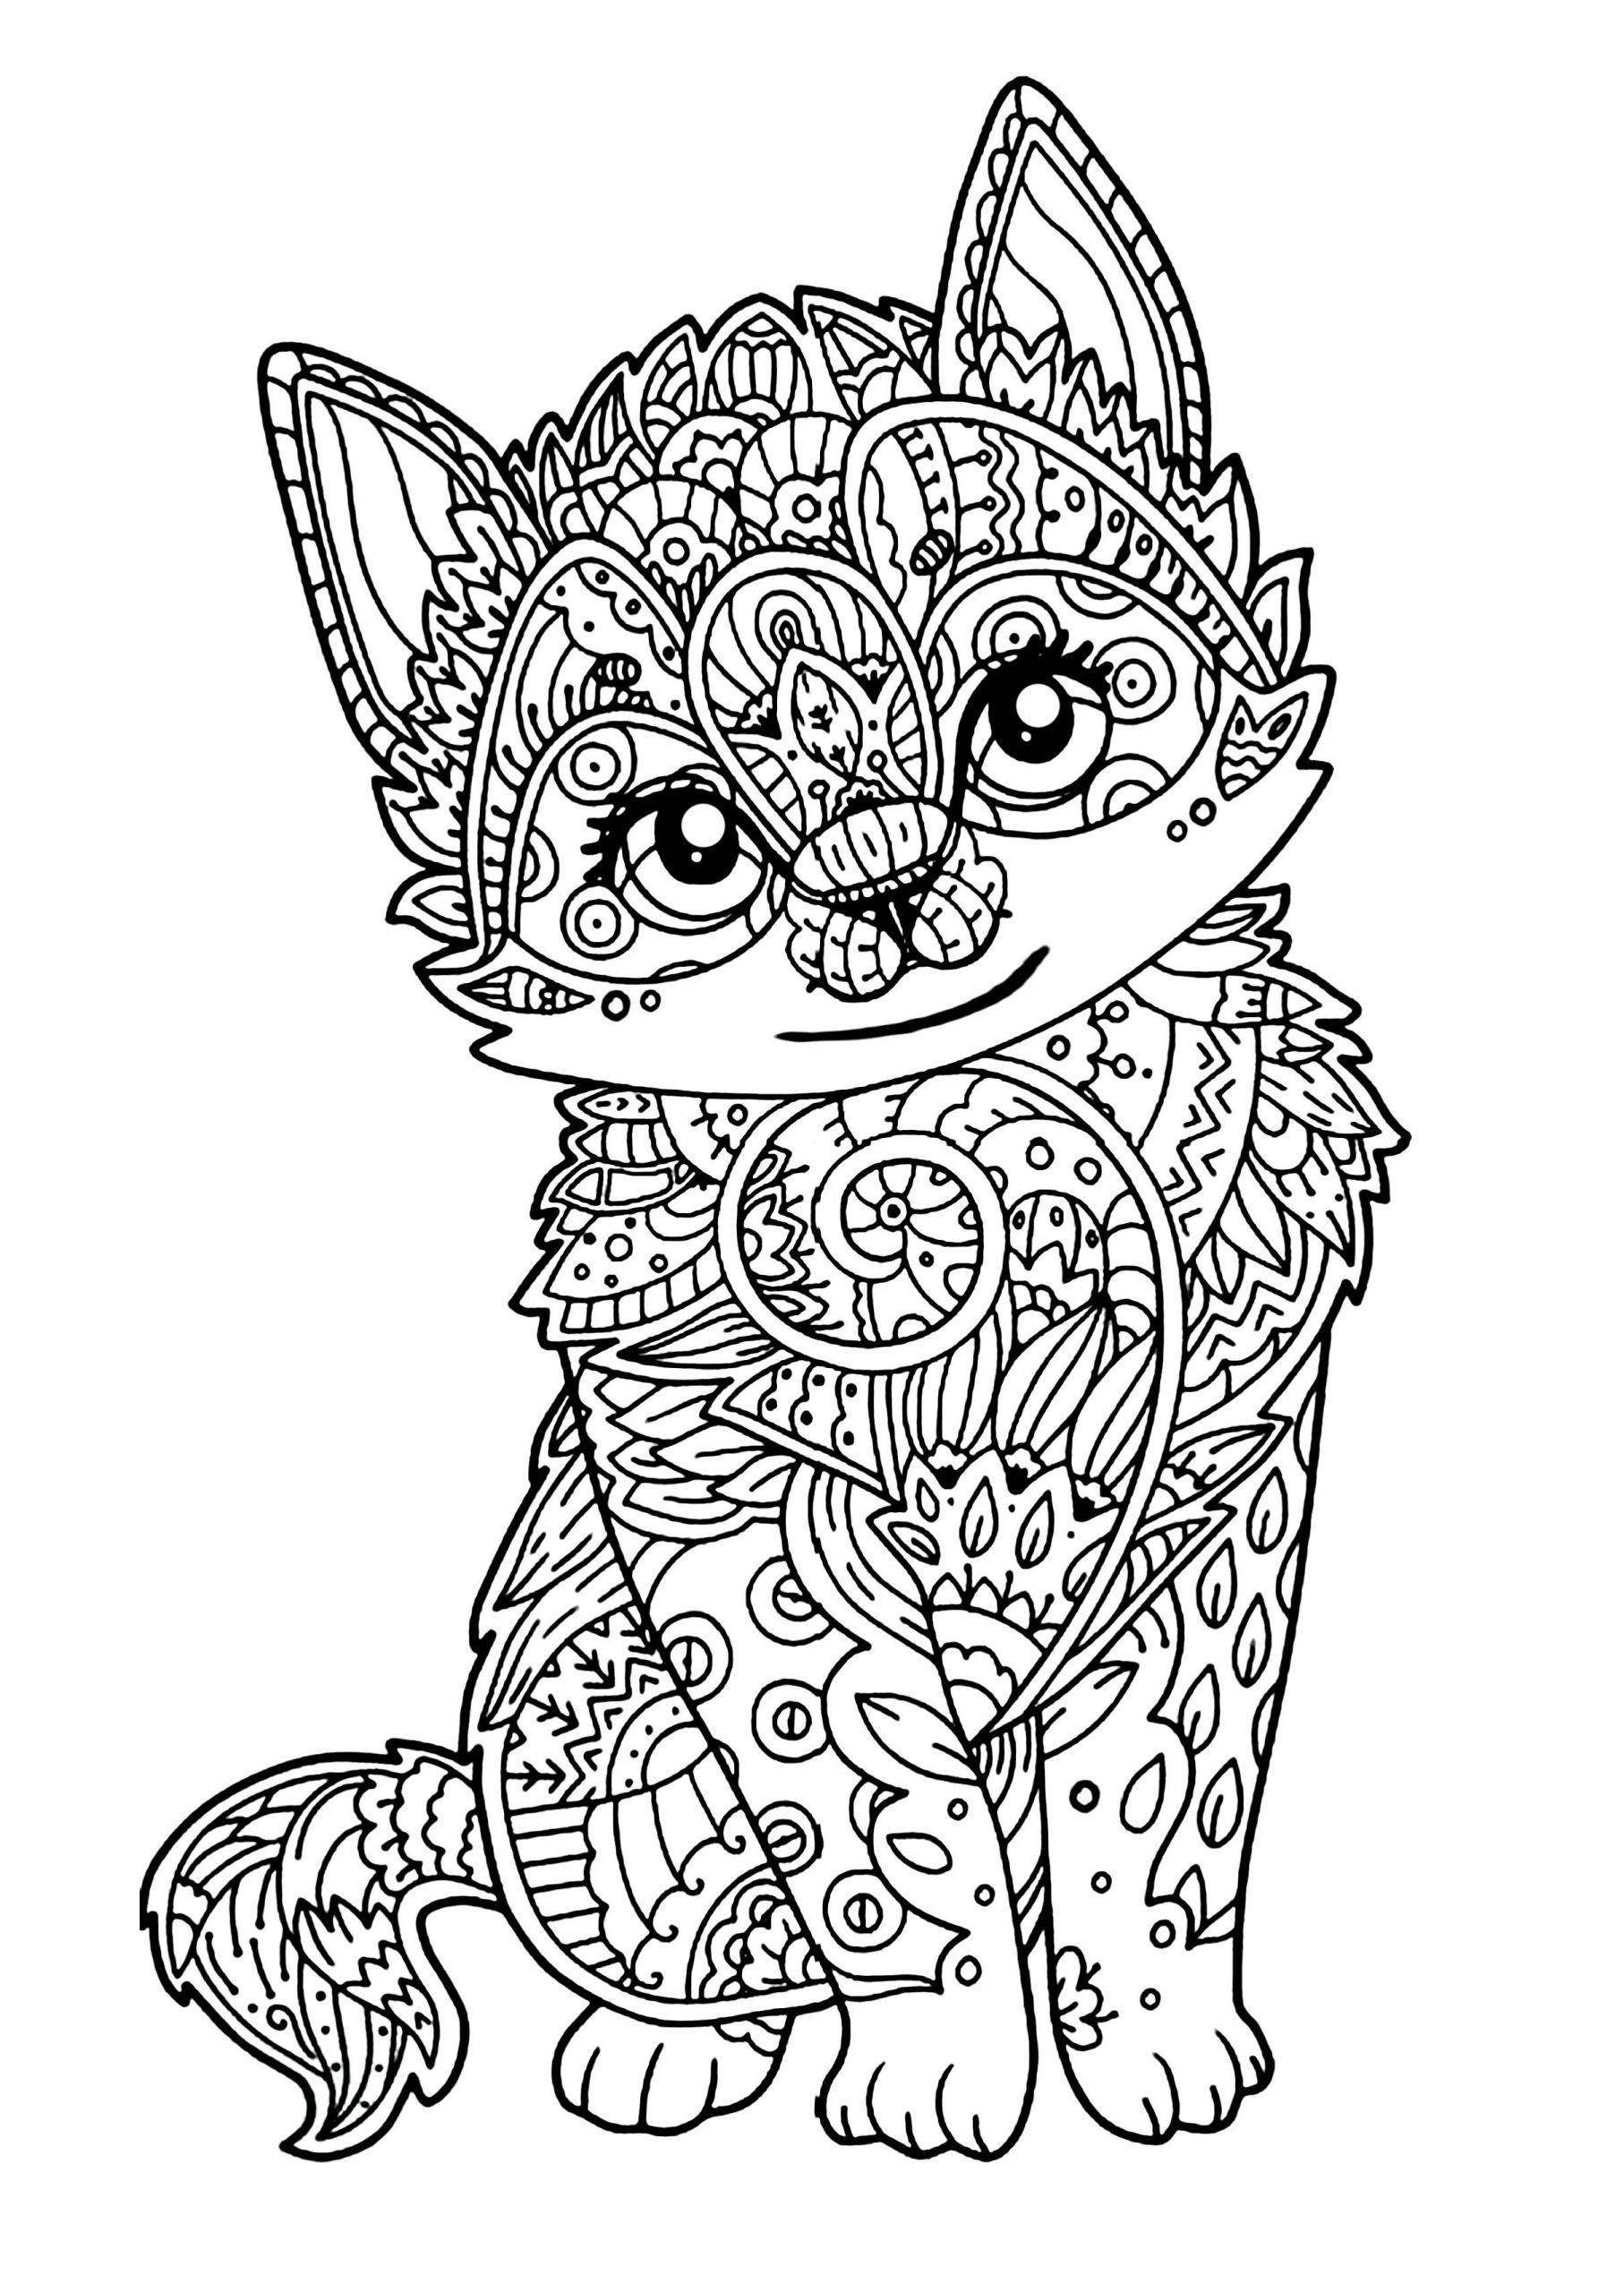 Adult Cat Coloring Pages
 Cute kitten Cats Adult Coloring Pages